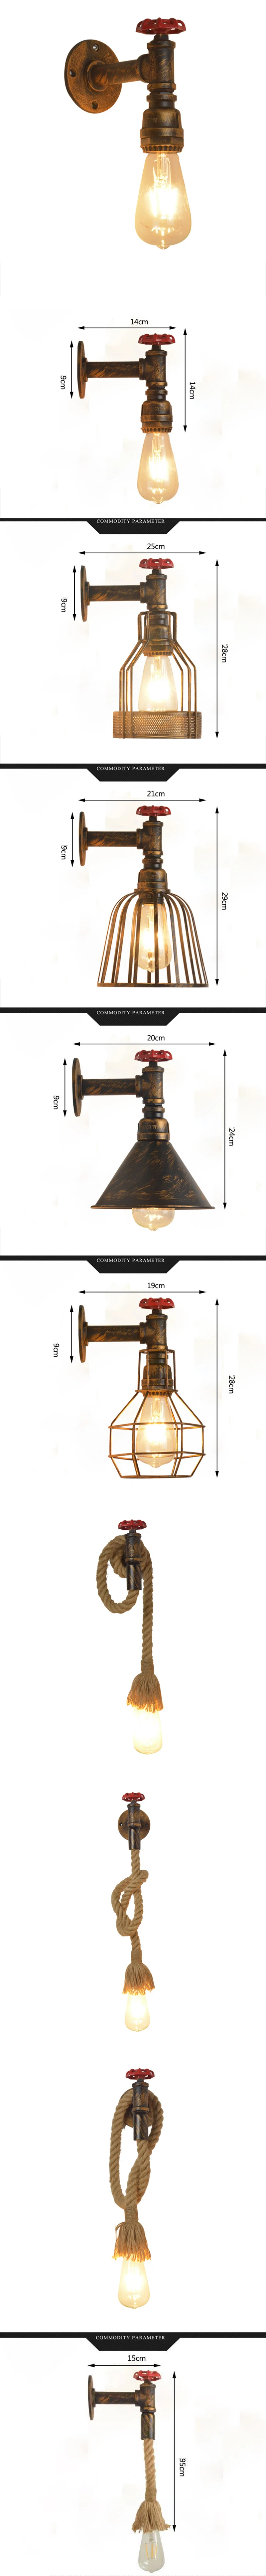 Loft retro American rural waterpipe style industrial wall lamps for cafe restaurant bar counter lighting